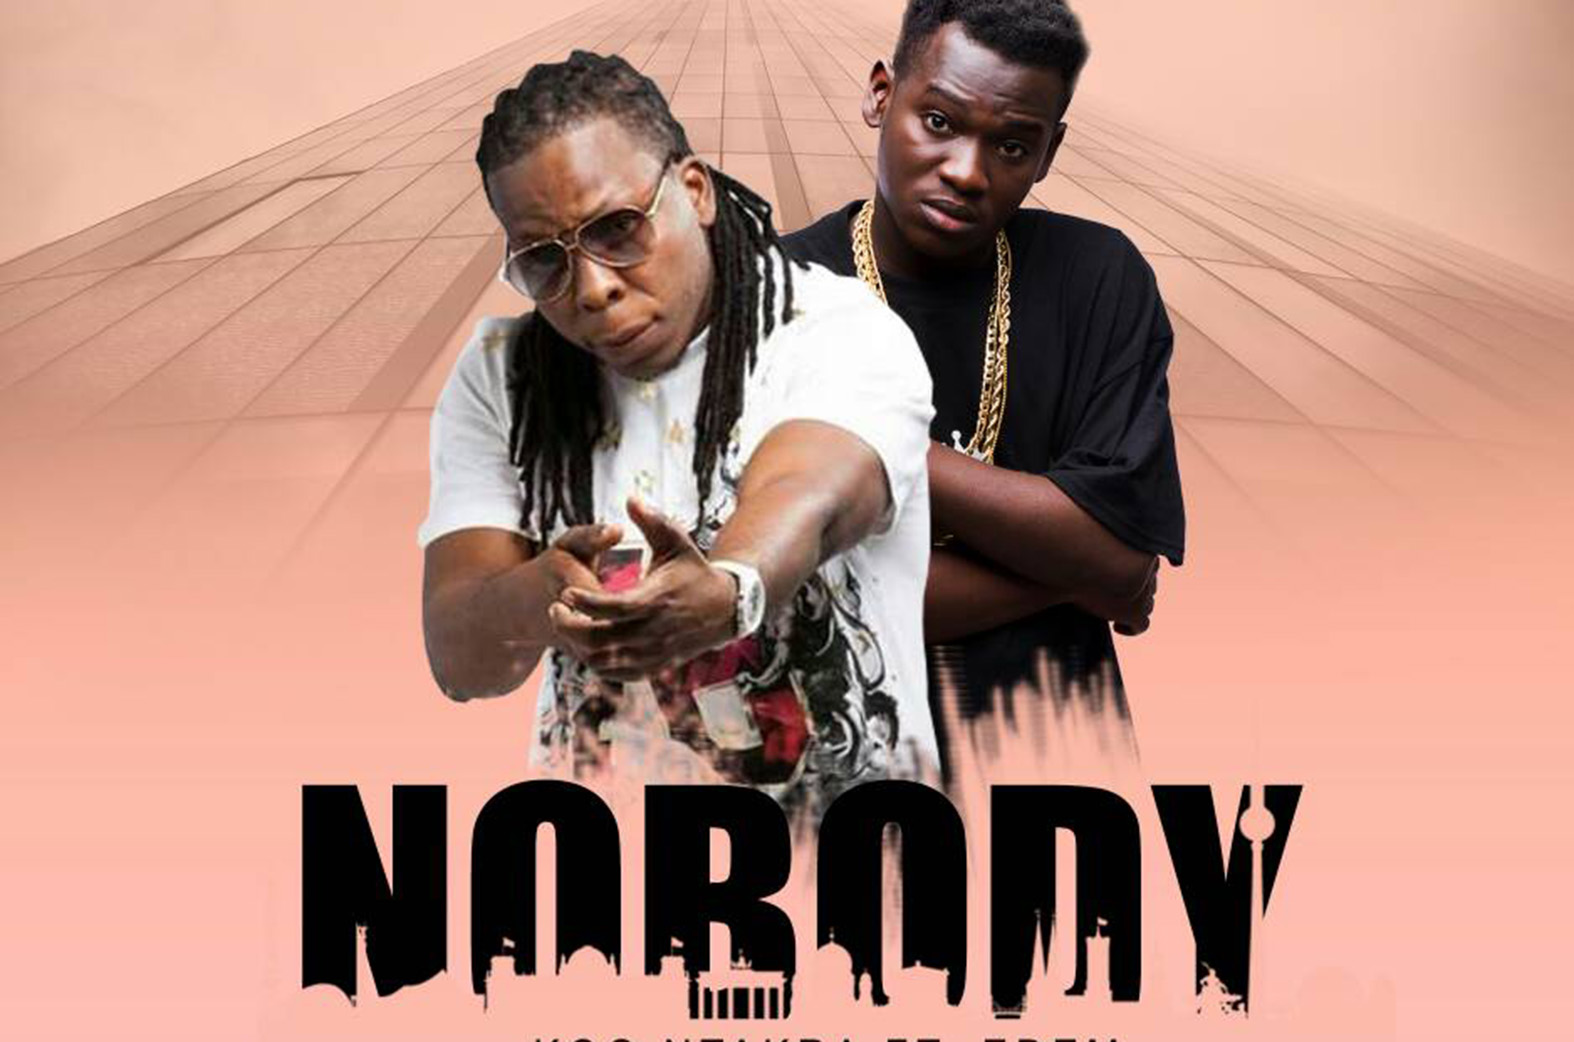 Who was Koo Ntakra & Edem referring to on ‘Nobody’ song?